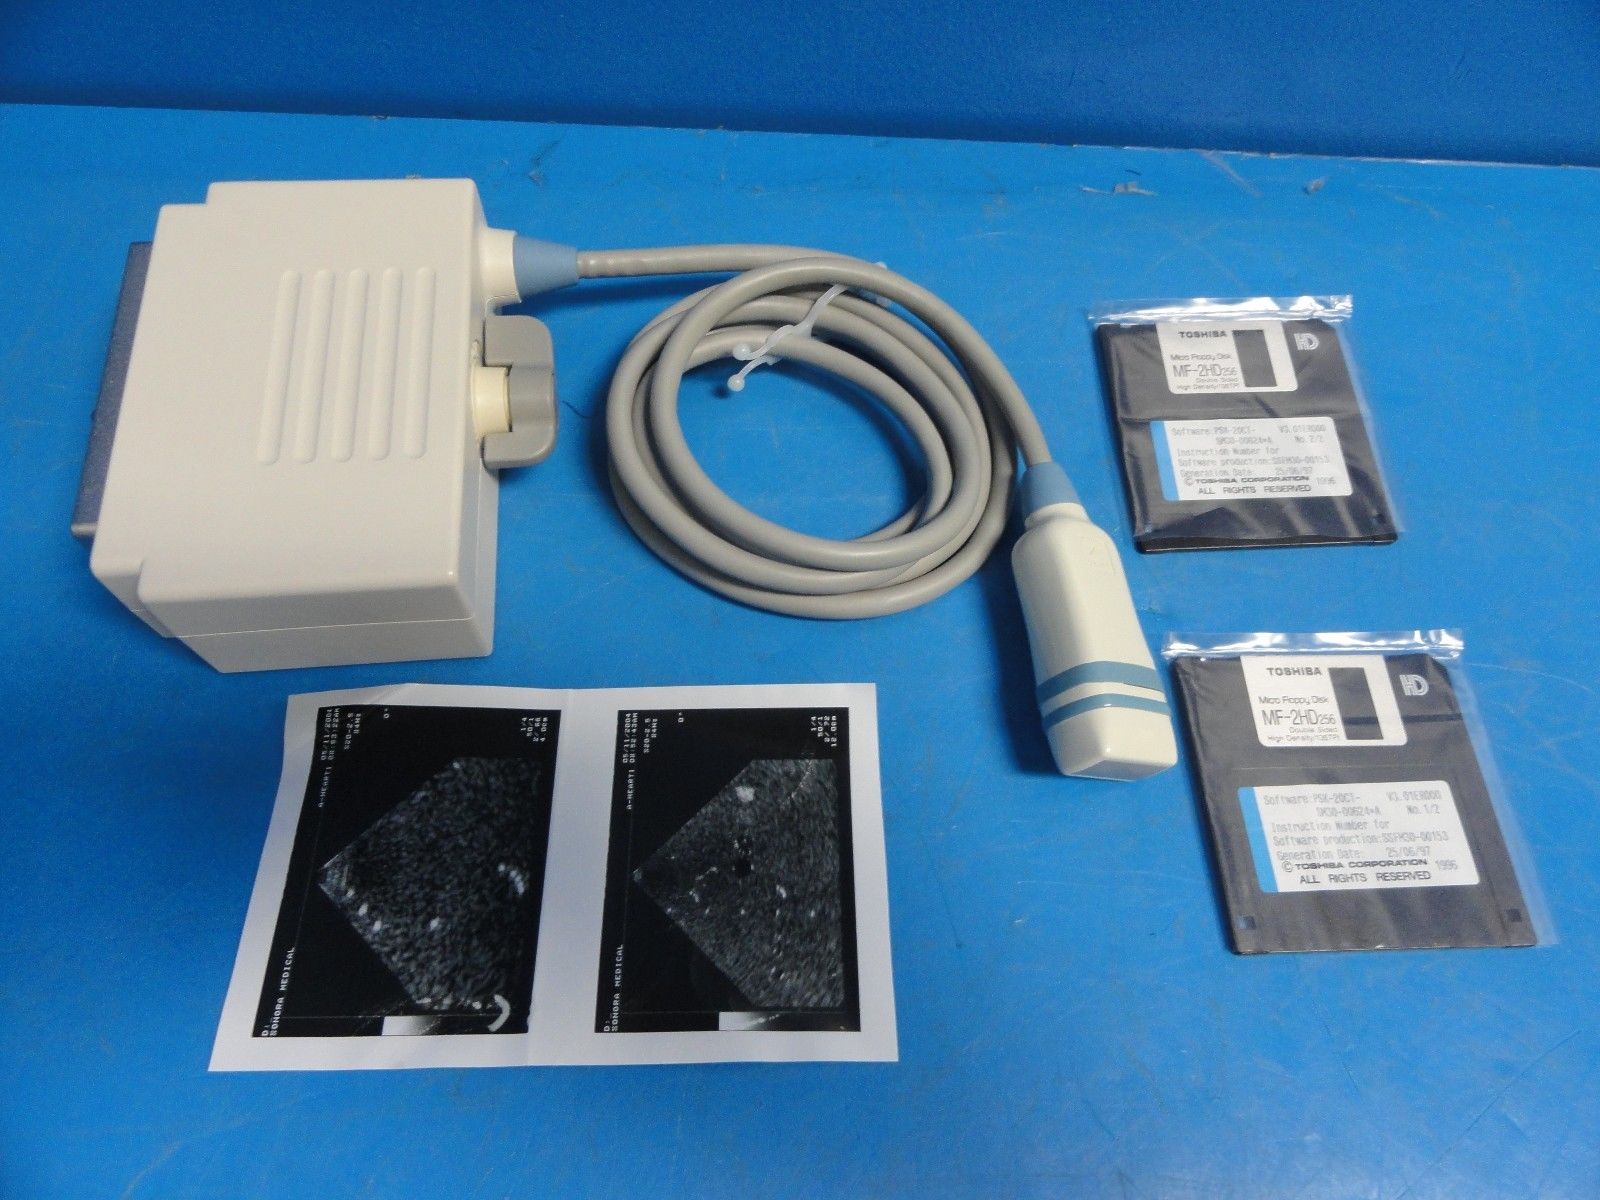 Toshiba PSK-20CT Phased Array Ultrasound Probe for SSA-380 & Powervision (7276) DIAGNOSTIC ULTRASOUND MACHINES FOR SALE